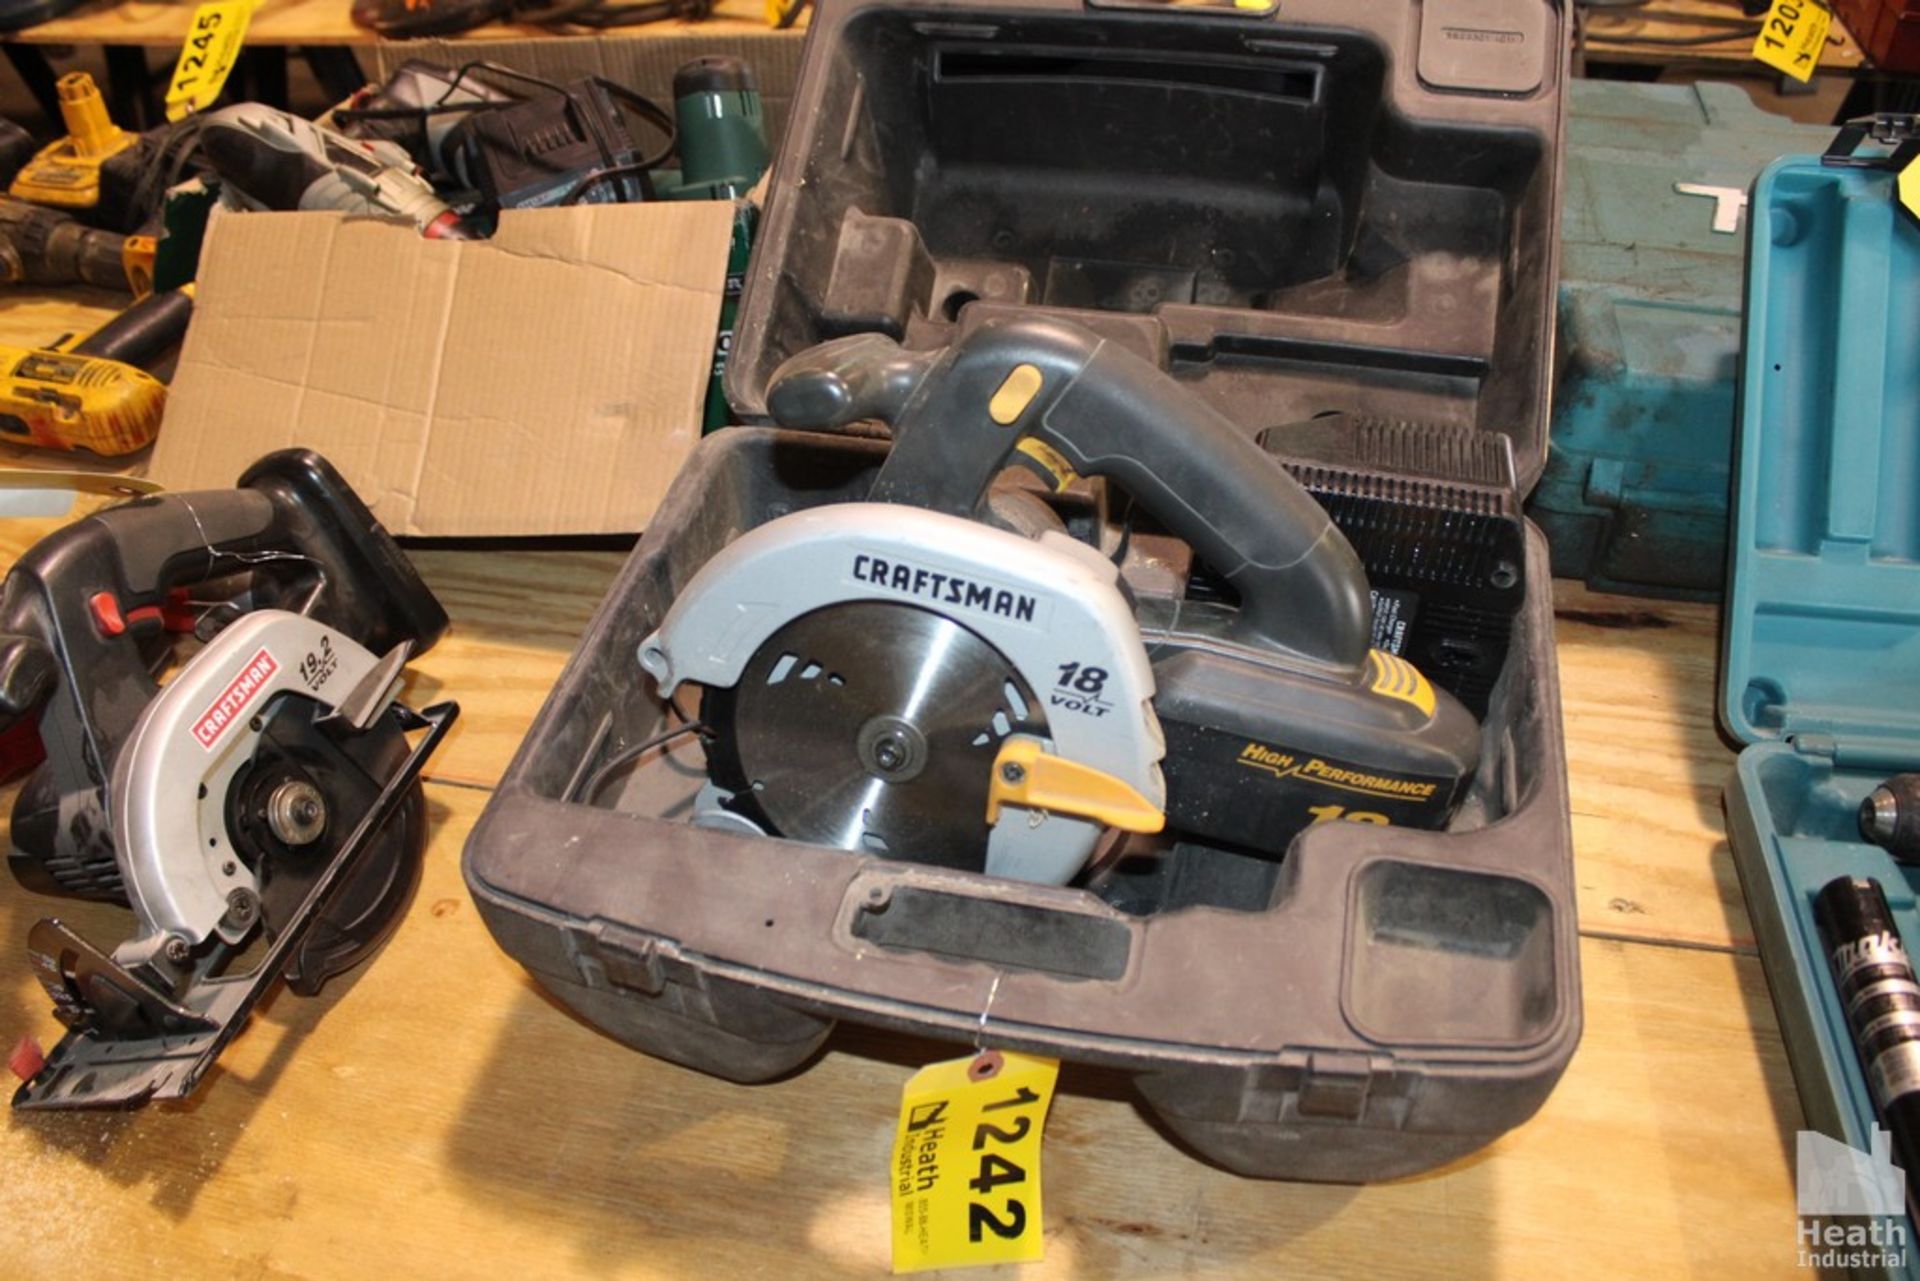 CRAFTSMAN 18 VOLT CORDLESS CIRCULAR SAW WITH BATTERY AND CHARGER